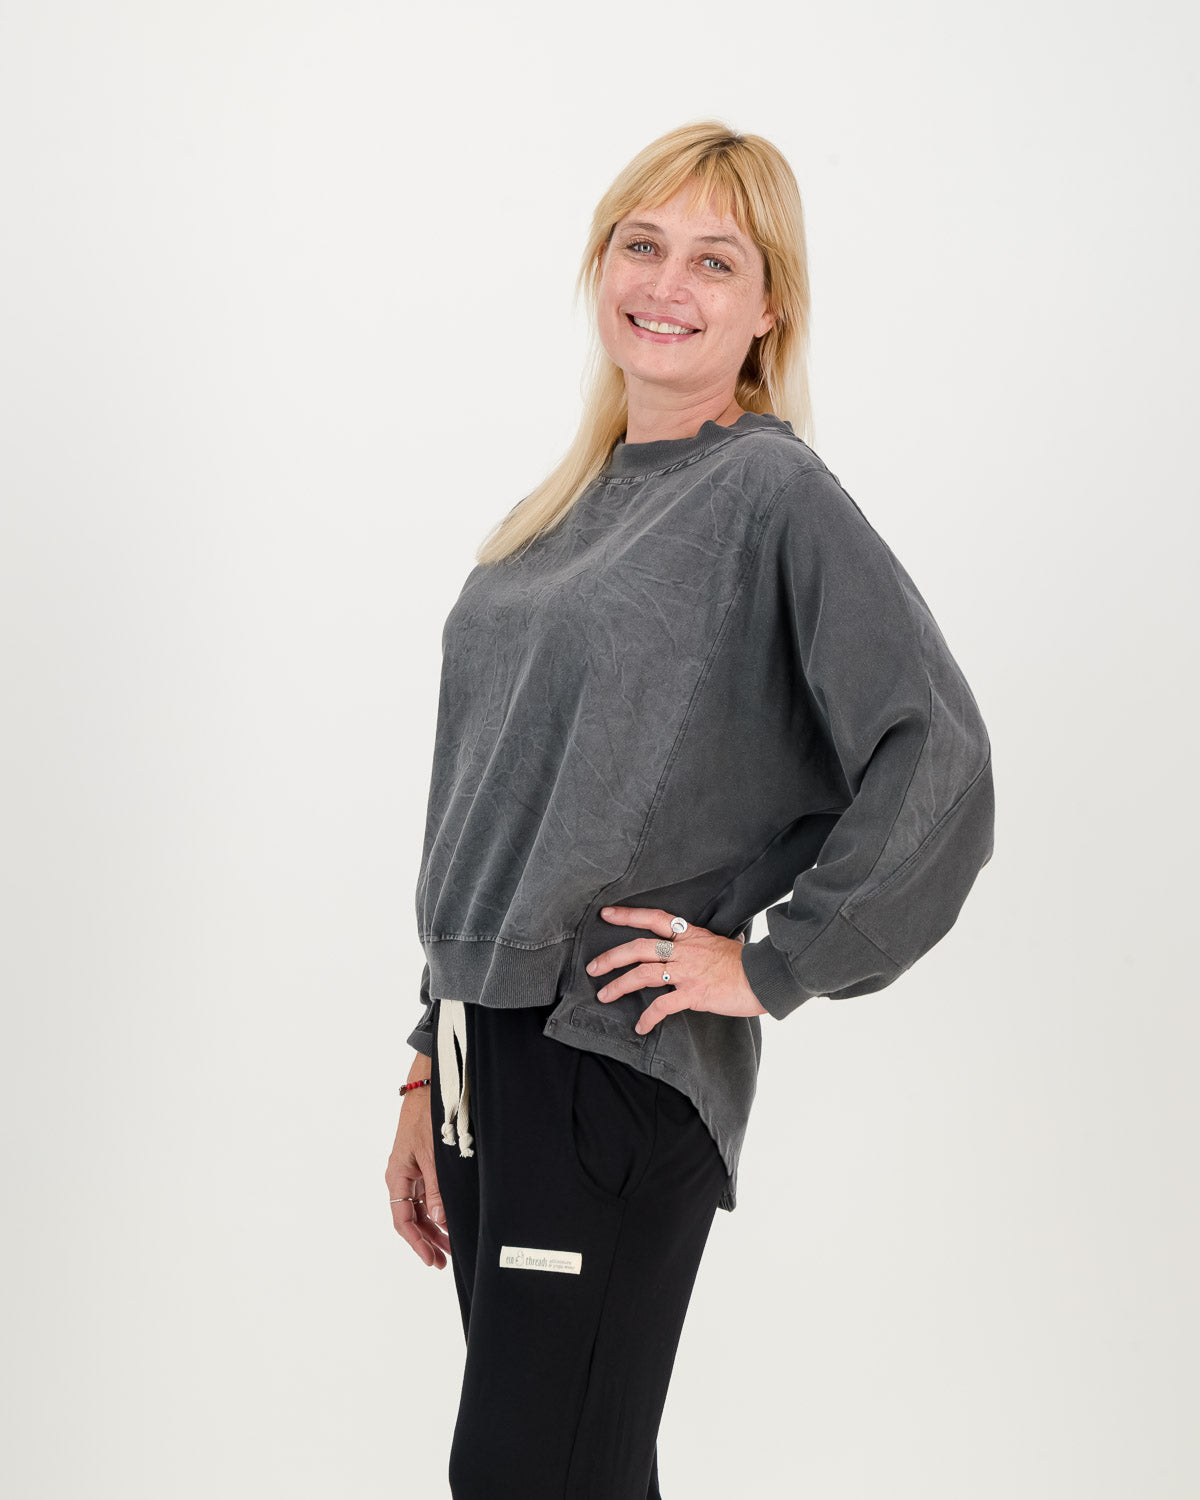 Batwing Overdyed Sweatshirt, charcoal color with black comfy pants